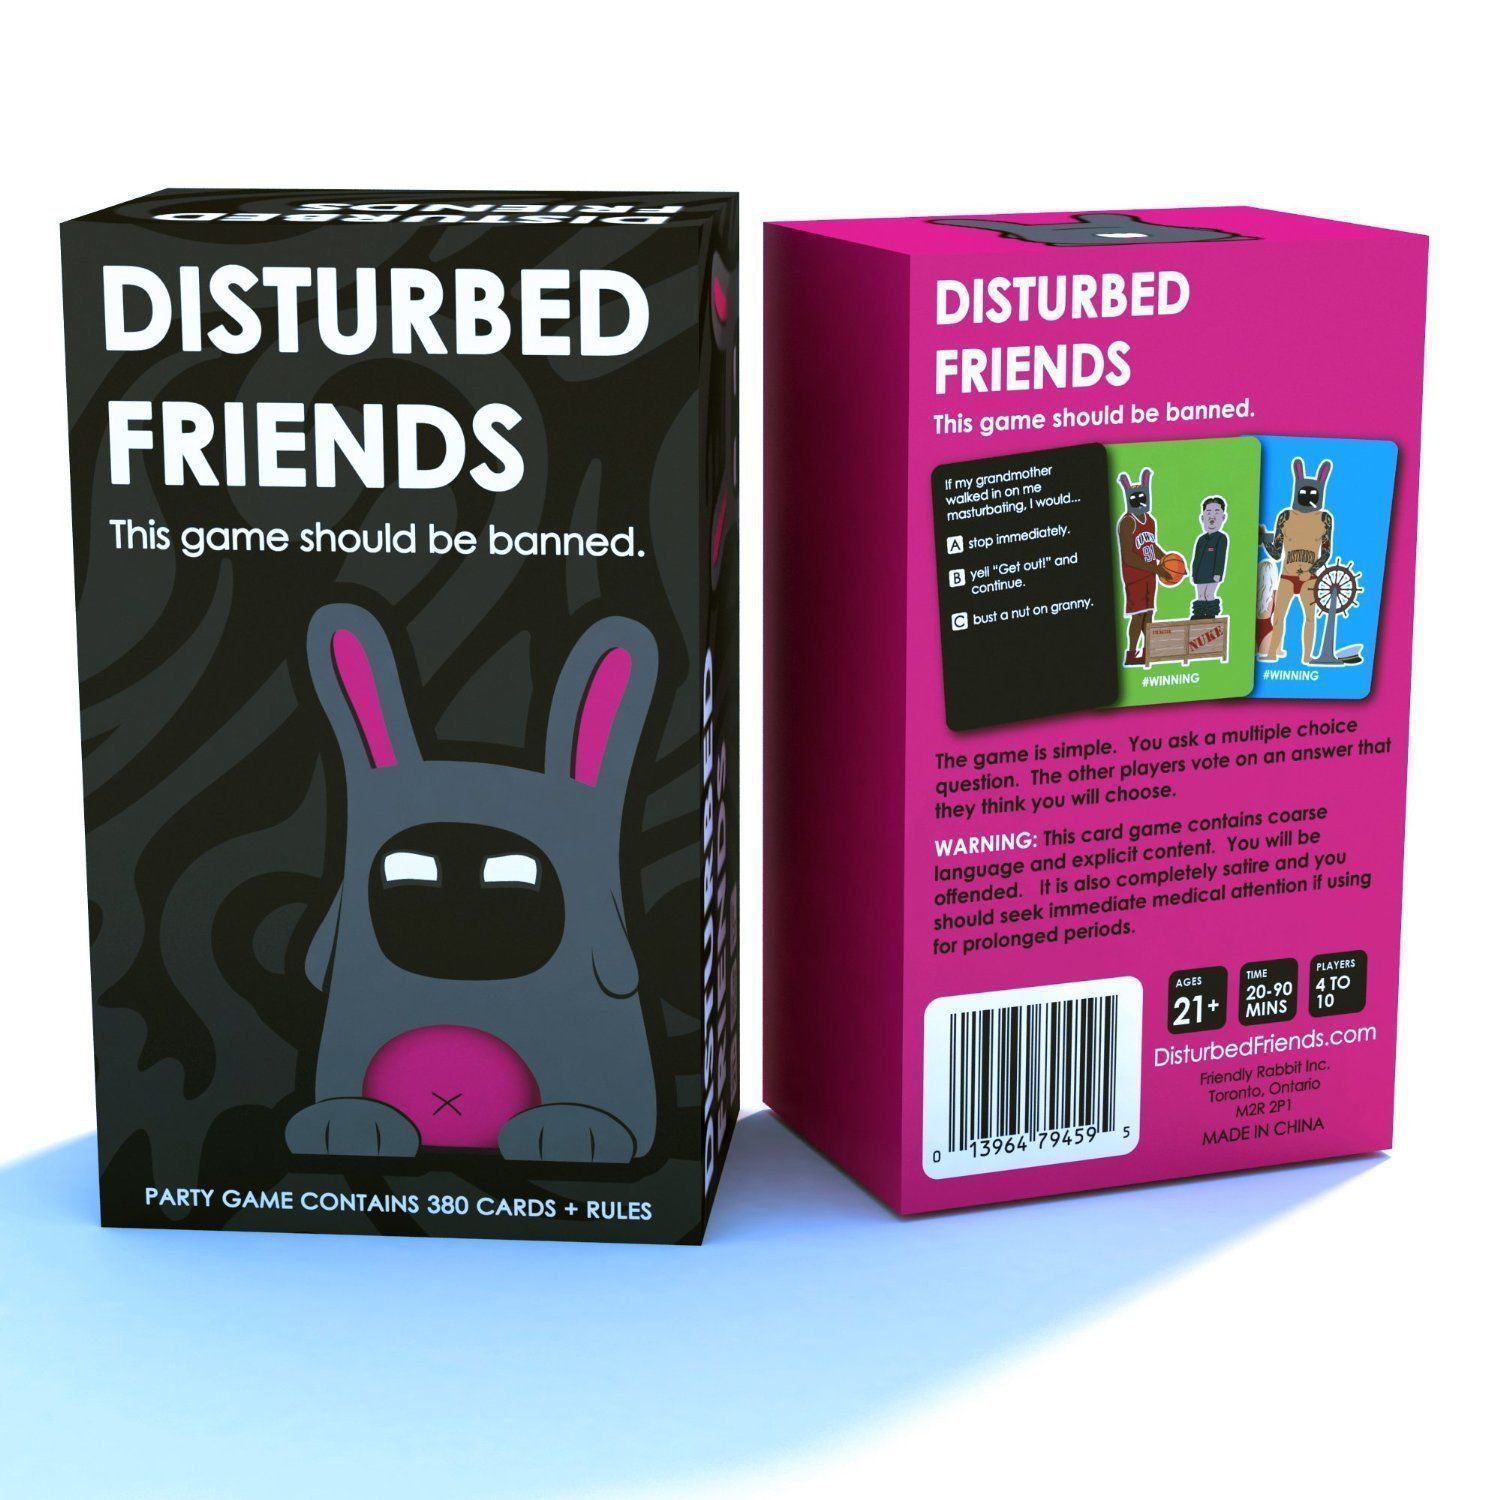 Disturbed Friends Card Game The Party Game Should be Banned